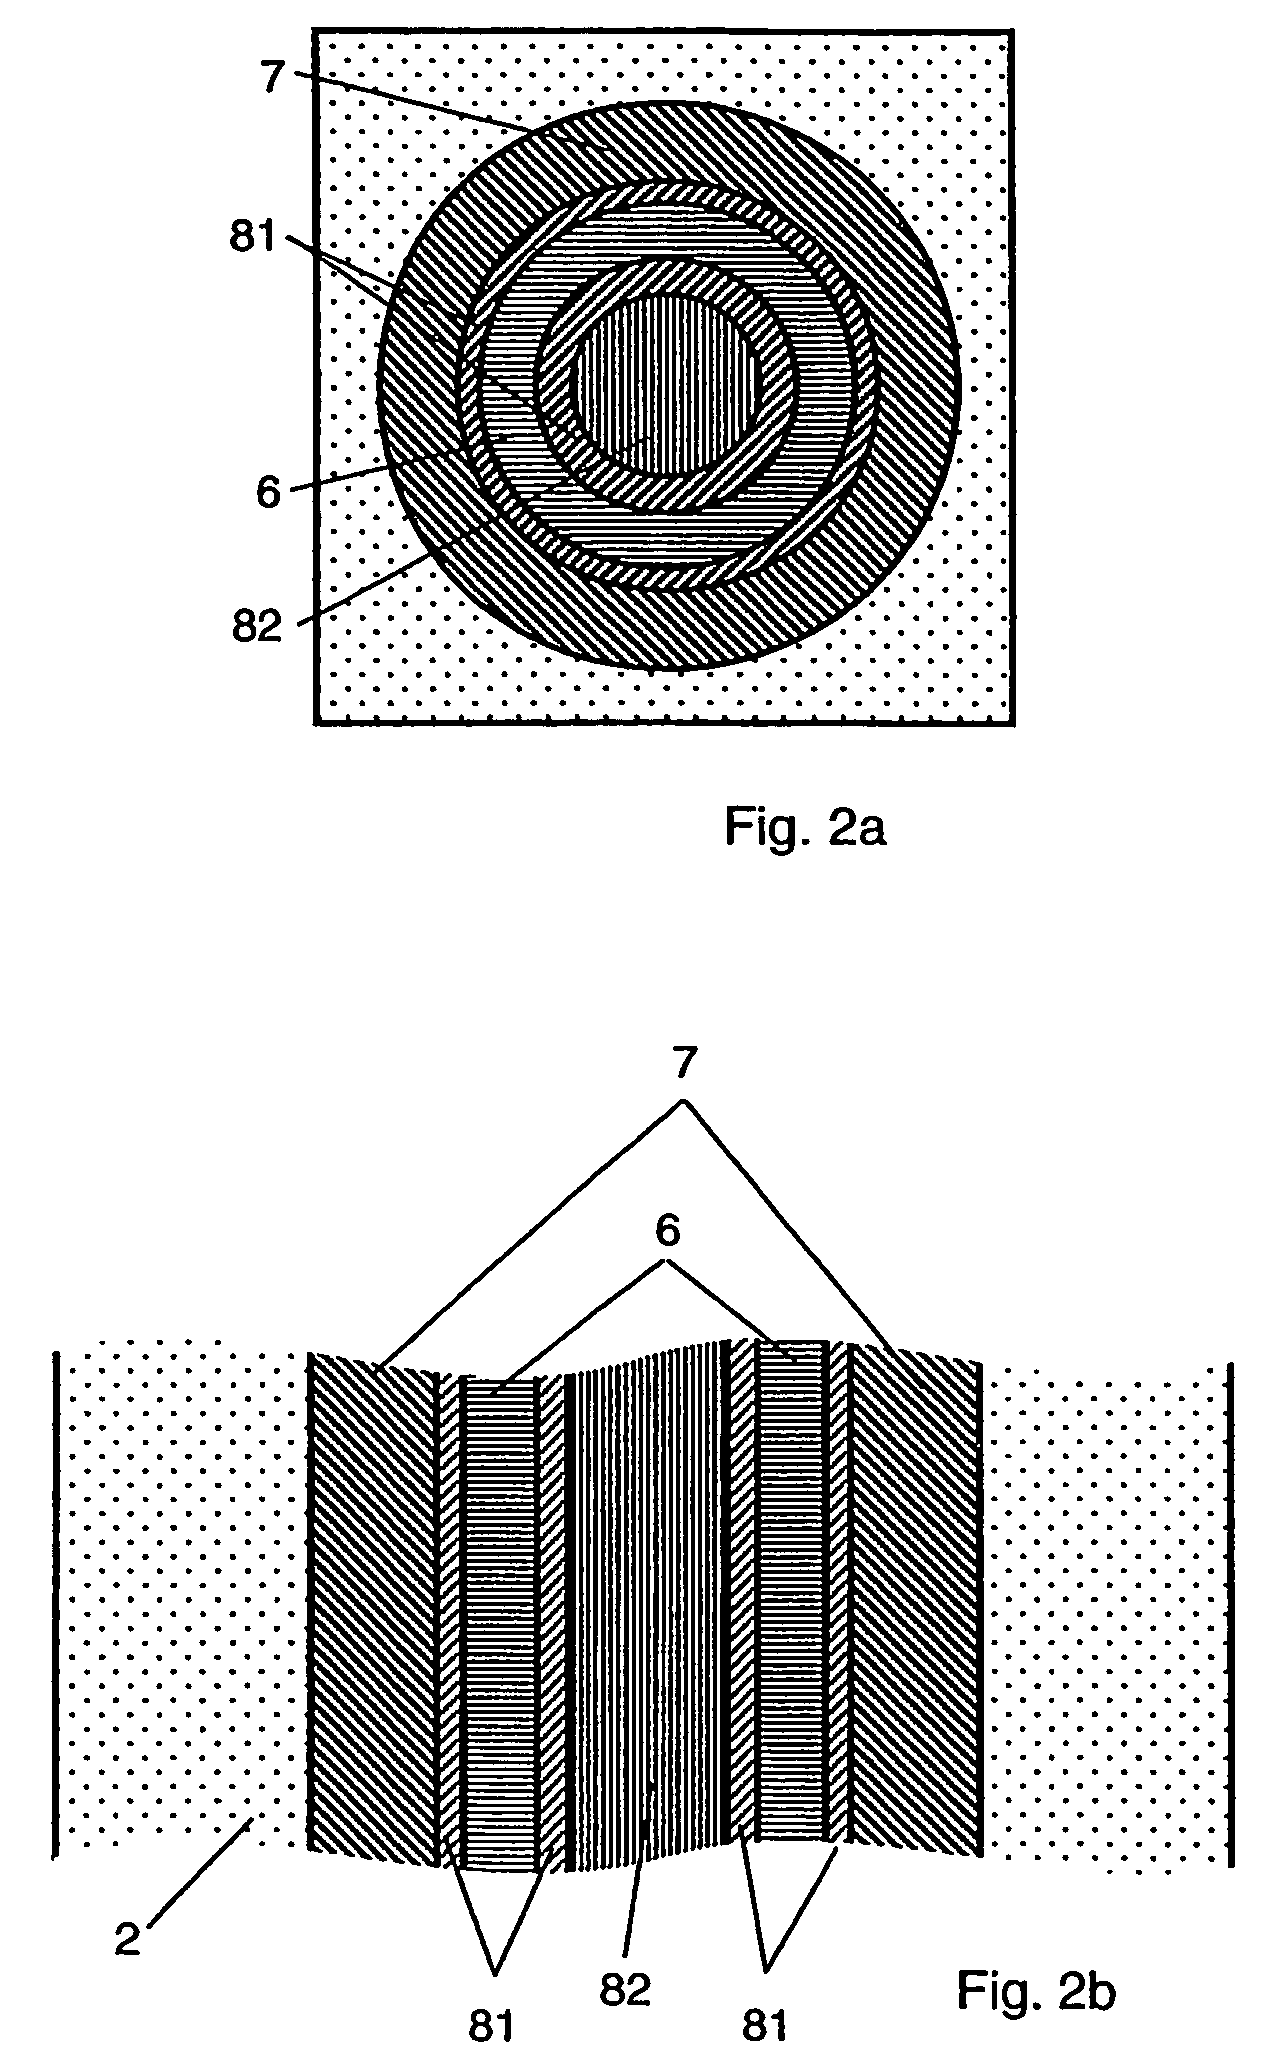 IGBT cathode design with improved safe operating area capability